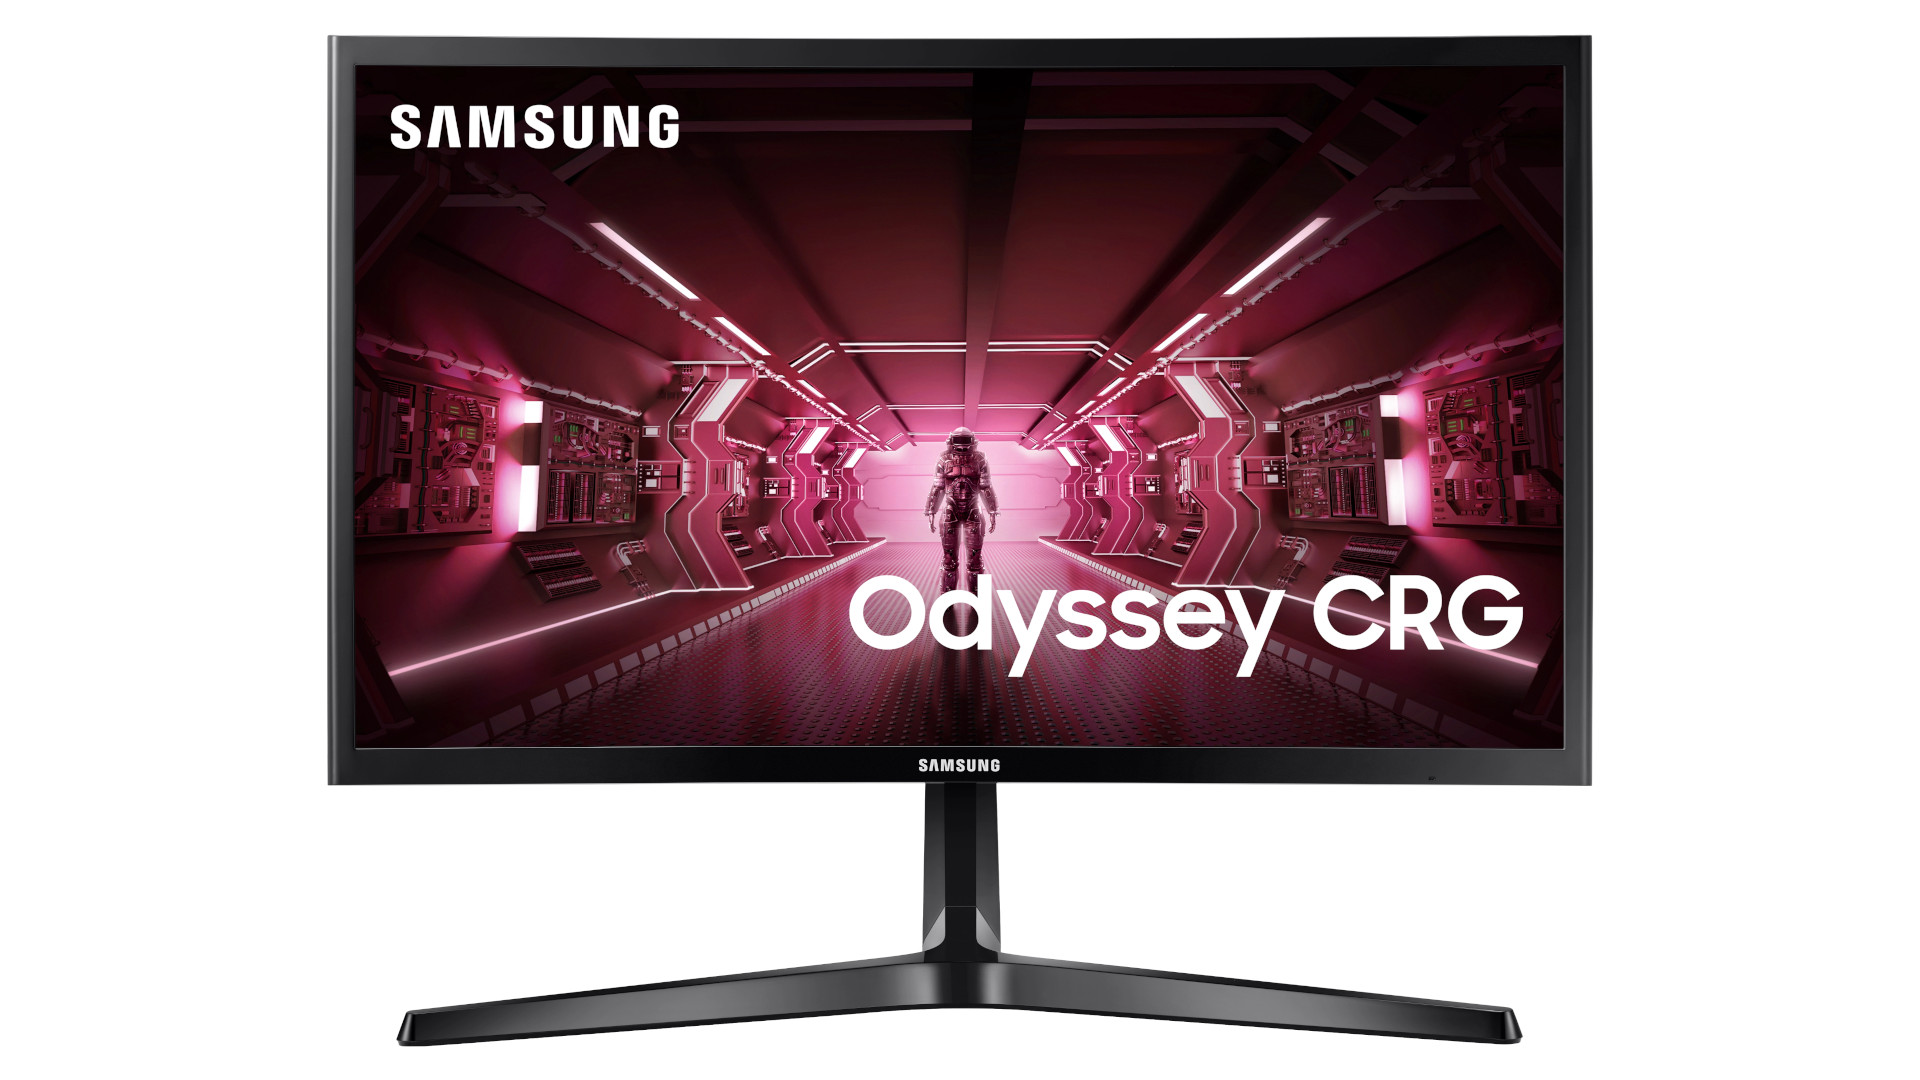 The Samsung CRG5 1080p 144Hz curved gaming monitor is 46% off on Amazon